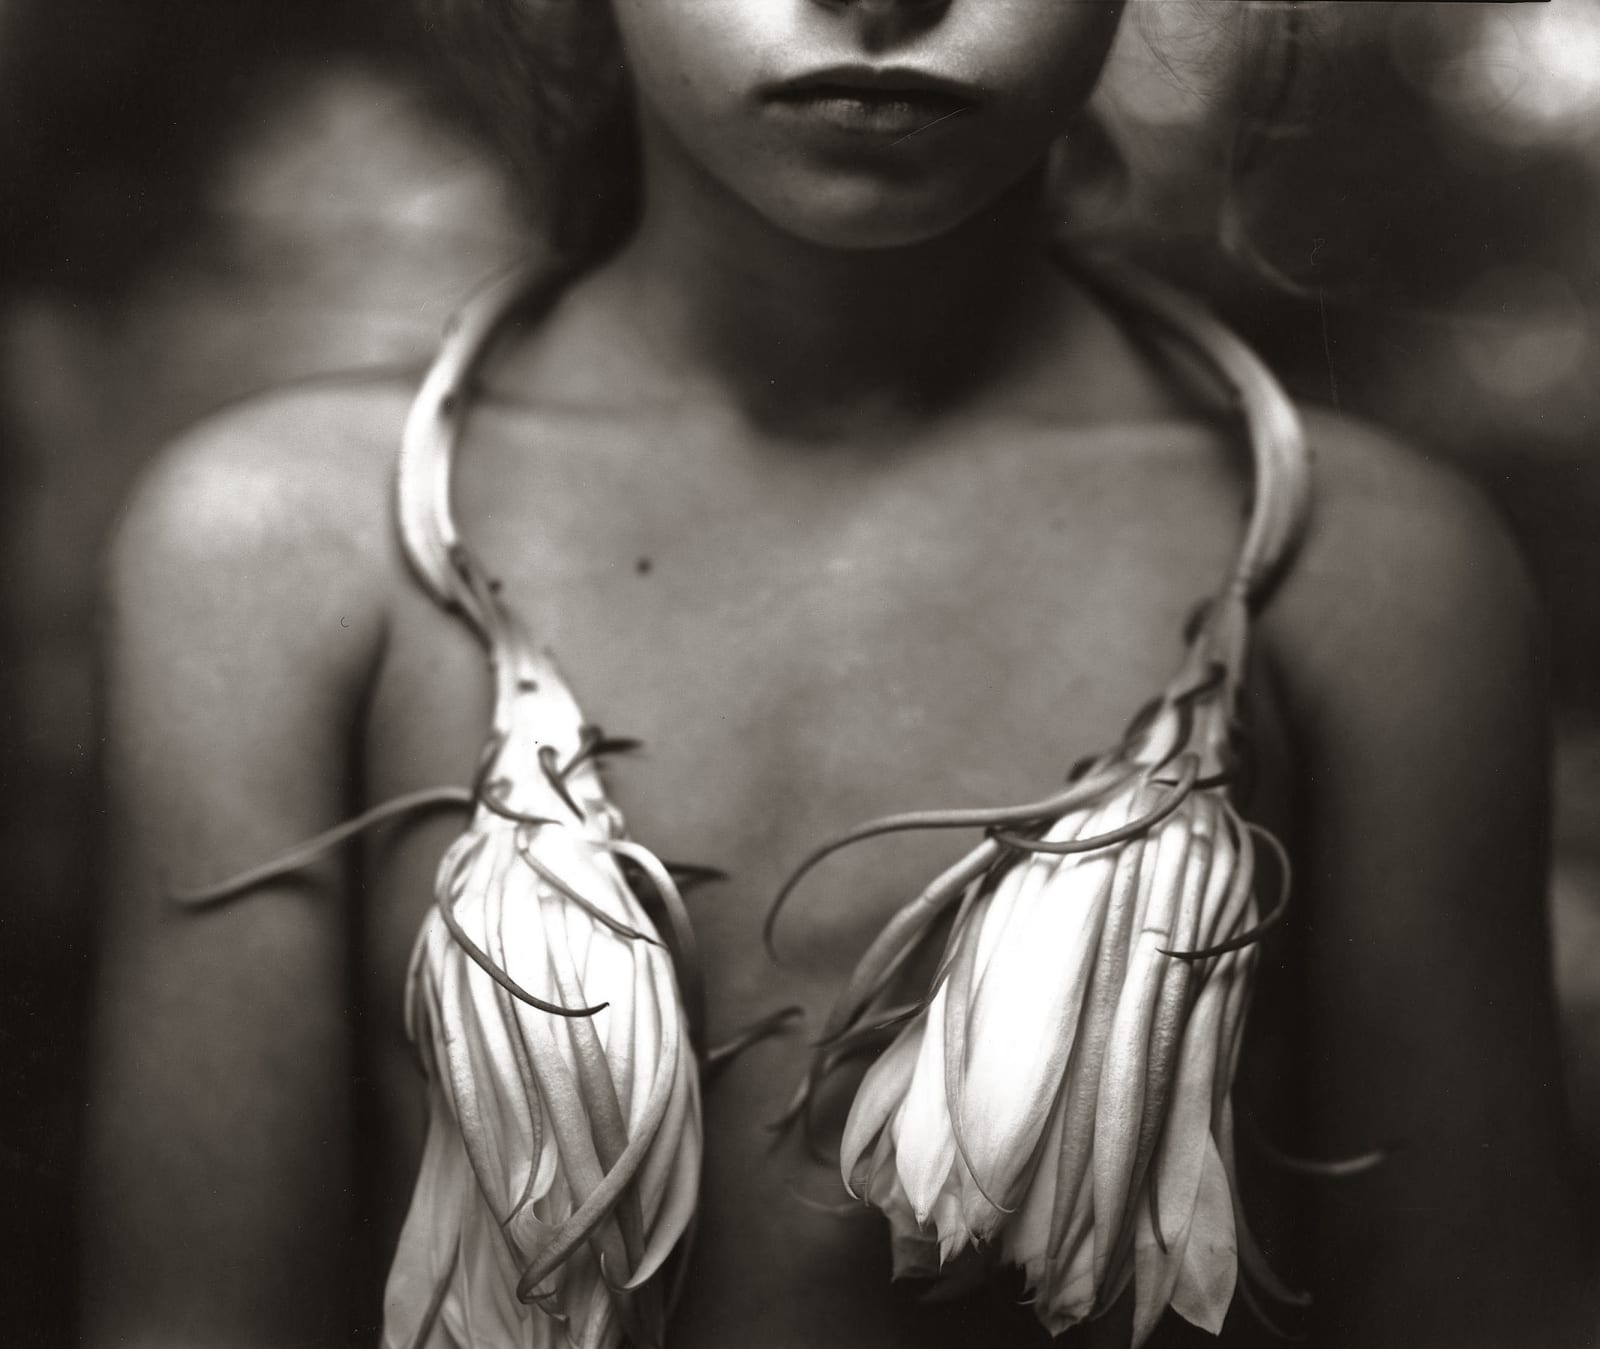 Night blooming cereus around Jessie's neck, from the Immediate Family series, by Sally Mann